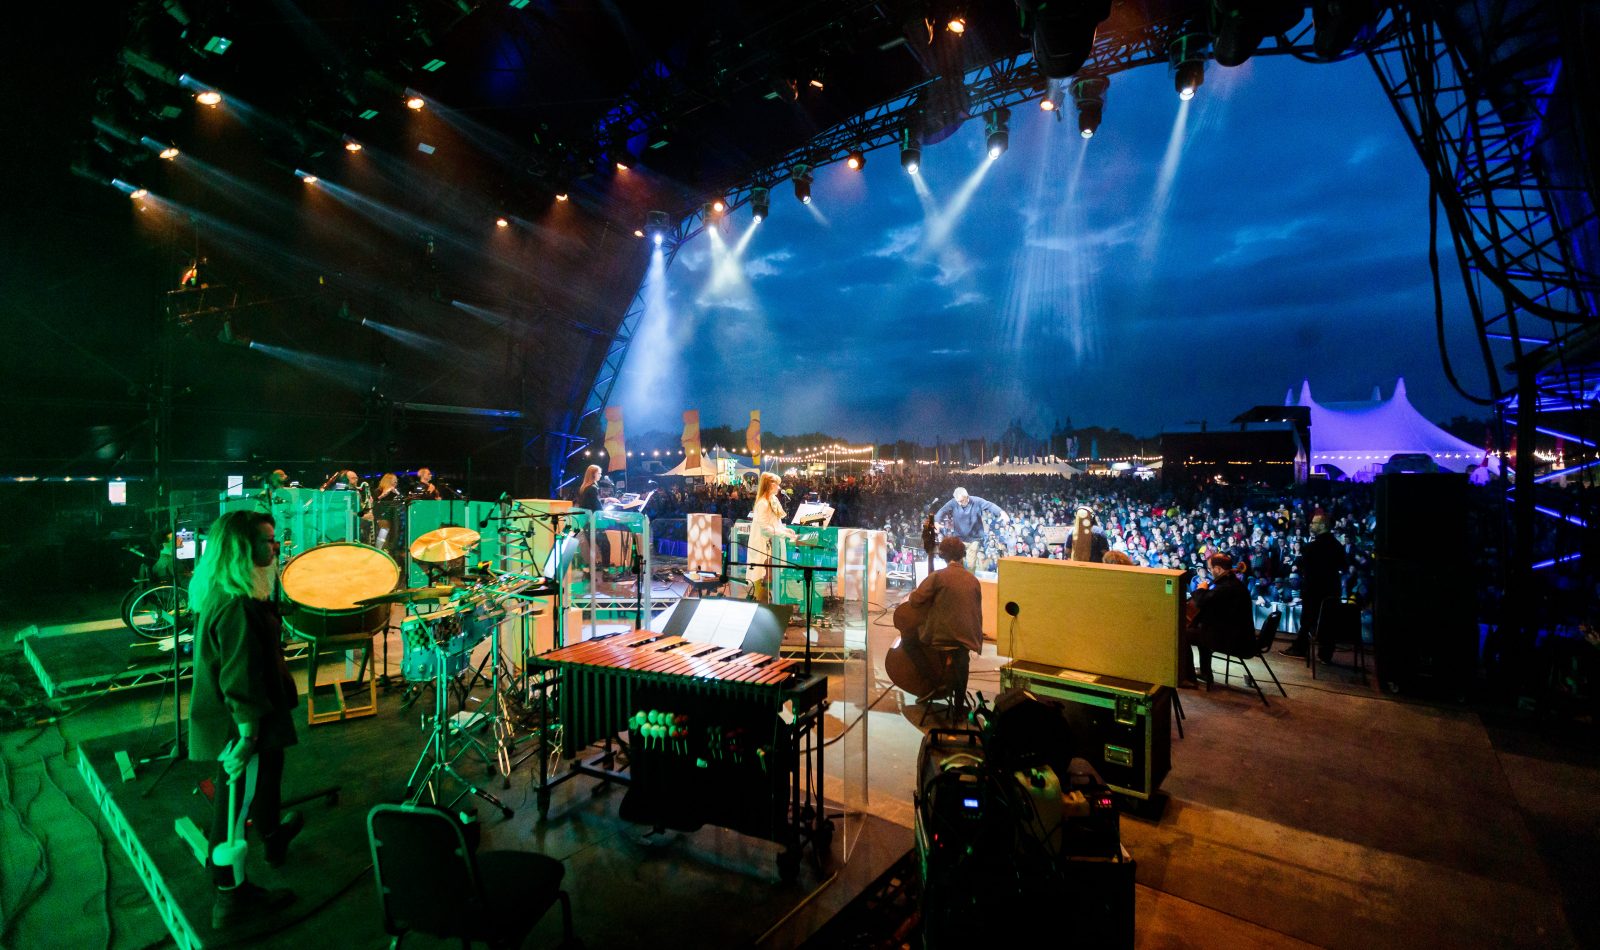 Taken from the back right of a festival stage, lighting in hues of green, within the orchestra onstage we can see a white female on percussion, the back of string players on cello and double bass. Centre stage a woman in a long white dress stands in front of a bank of synthesisers. Beyond the stage a crowd stands under a twilit cloudy sky, festival tents and lighting behind them.